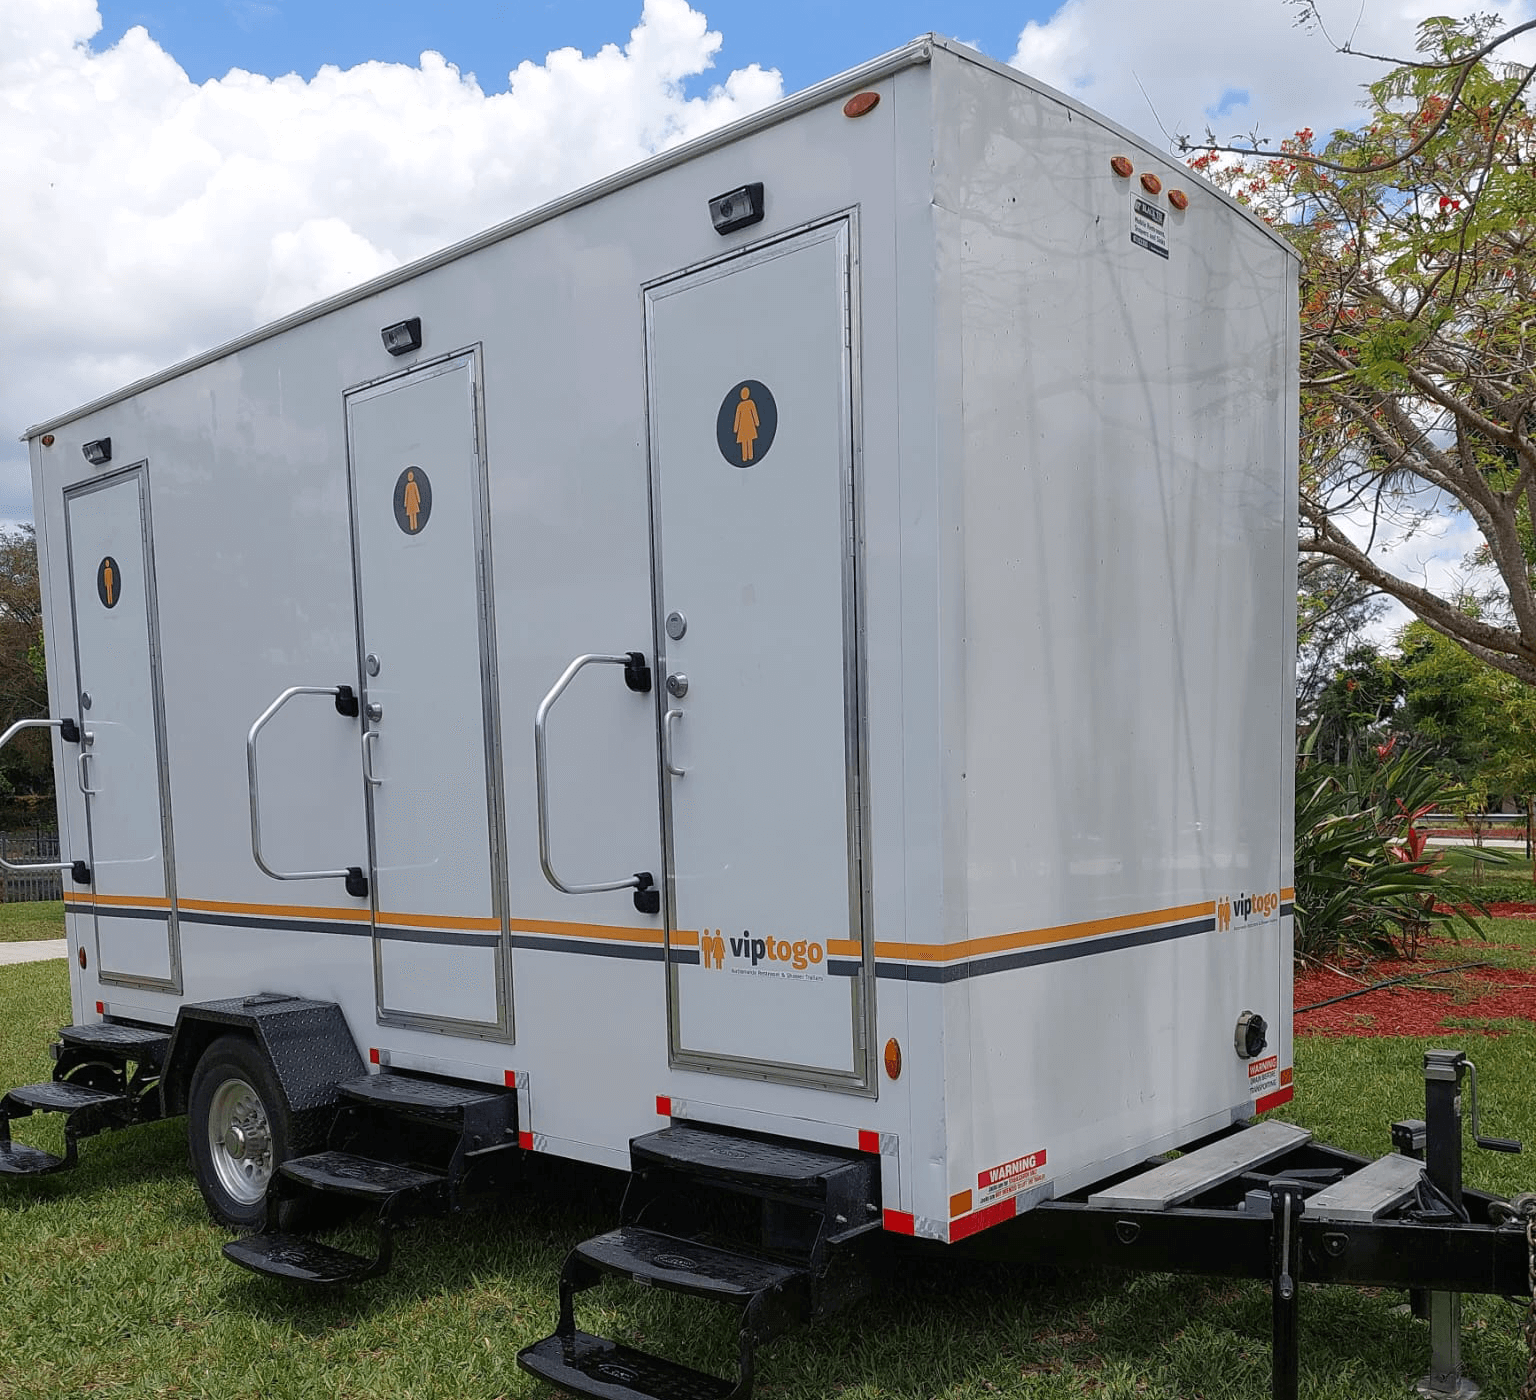 A portable toilet restroom trailer outdoors